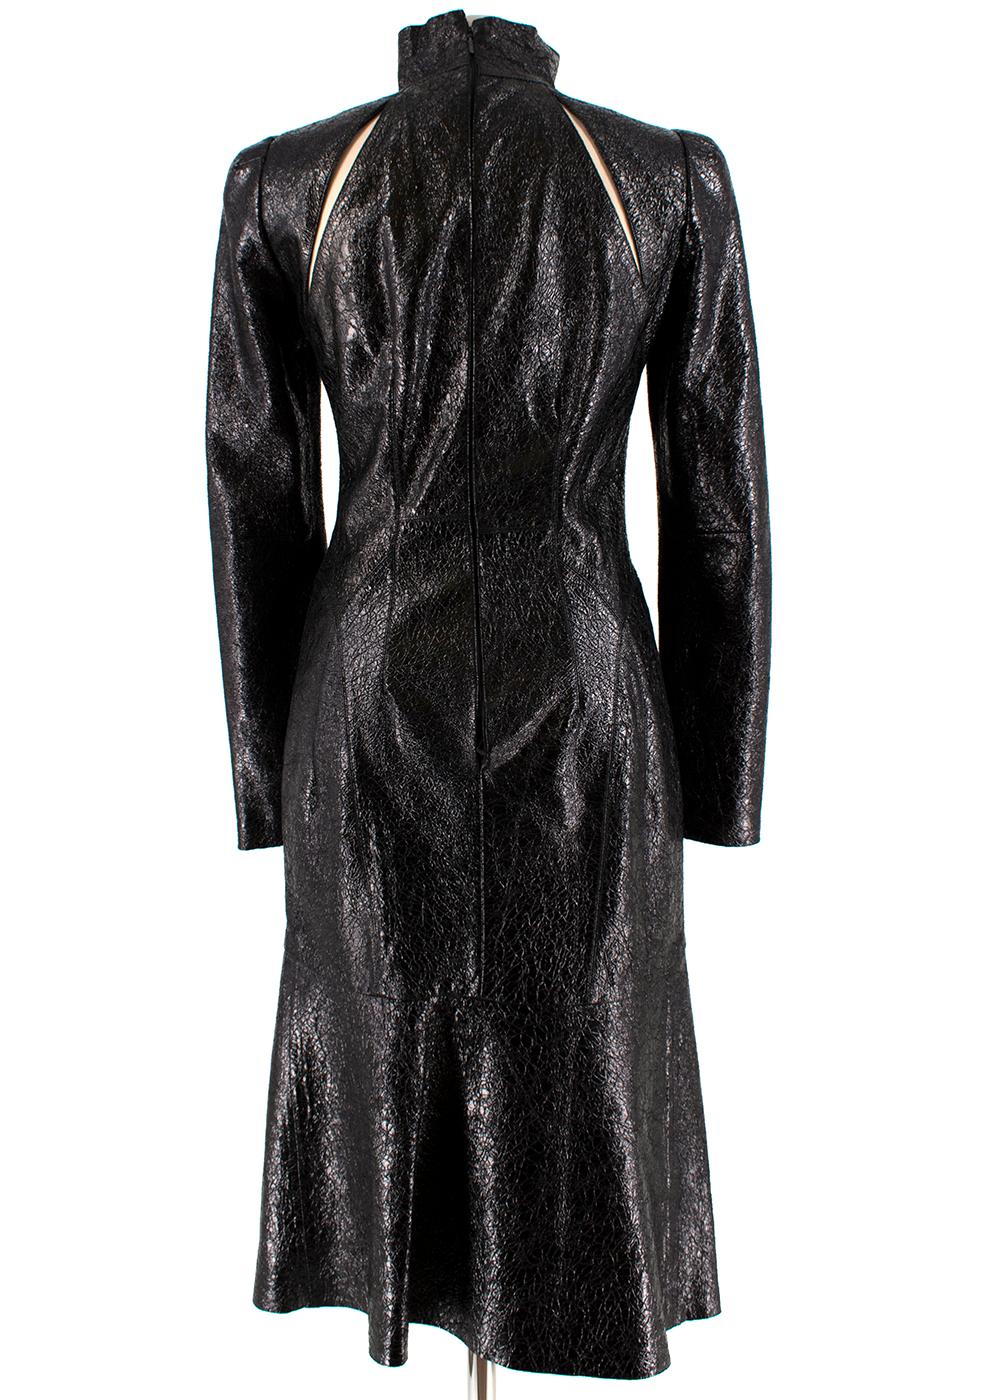 Gucci Crackled Patent Leather High Neck Dress

- Cracked Texture 
- Two Back Shoulder Cut Out Slits 
- Long Sleeved 
- Padded Shoulders 
- Lined 
-  Concealed Back Zip Fastening 

Material:
- 74% Acetate 
- 20% Silk 
- Professional Leather Clean